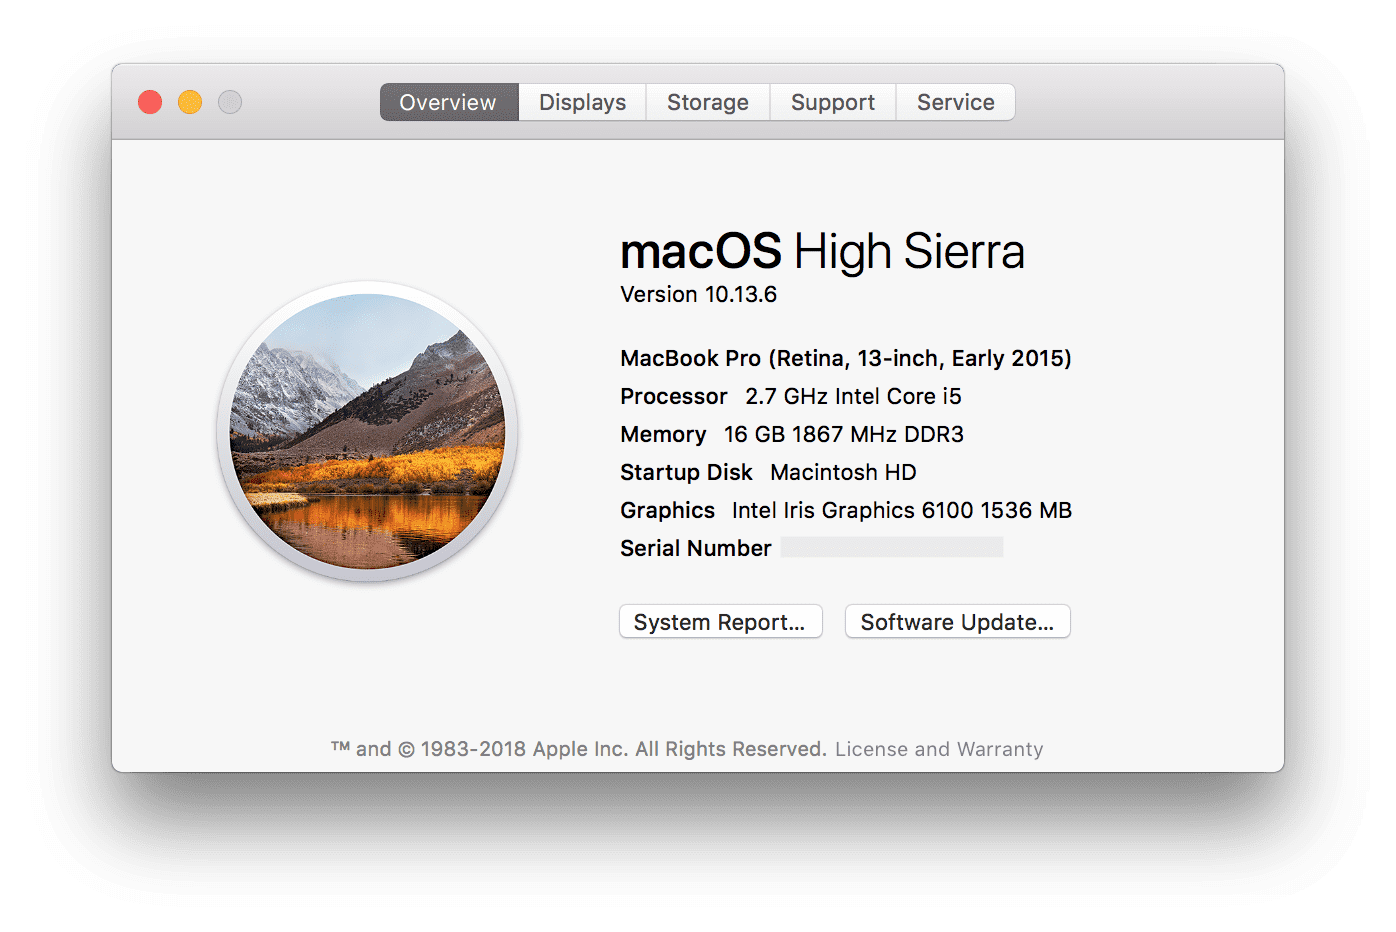 MacOS overview page